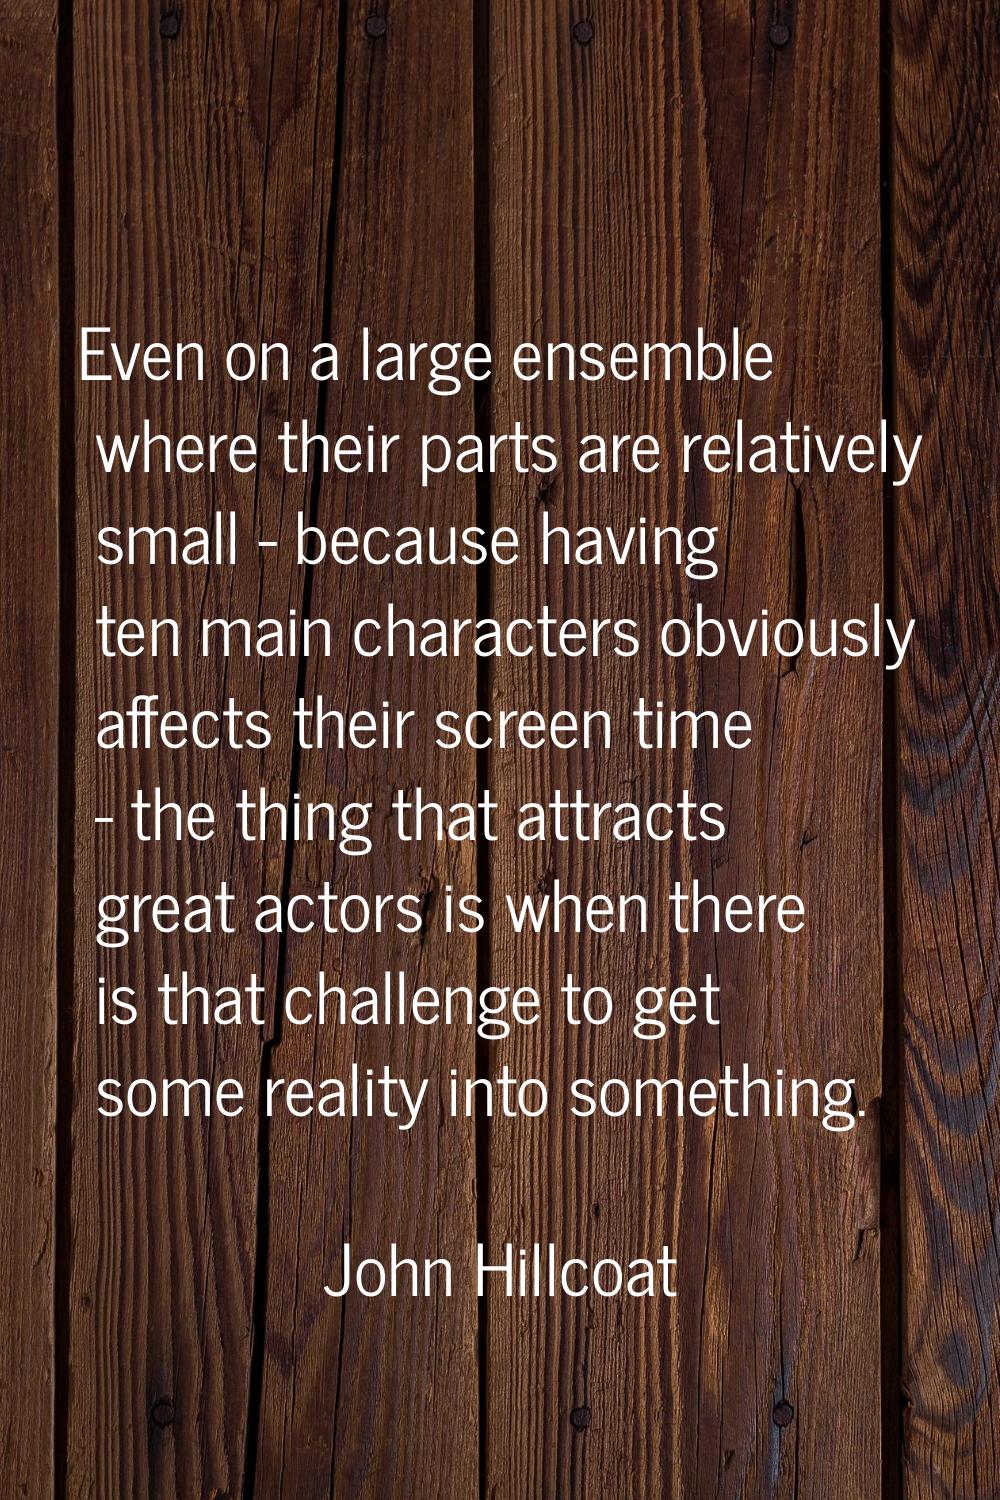 Even on a large ensemble where their parts are relatively small - because having ten main character